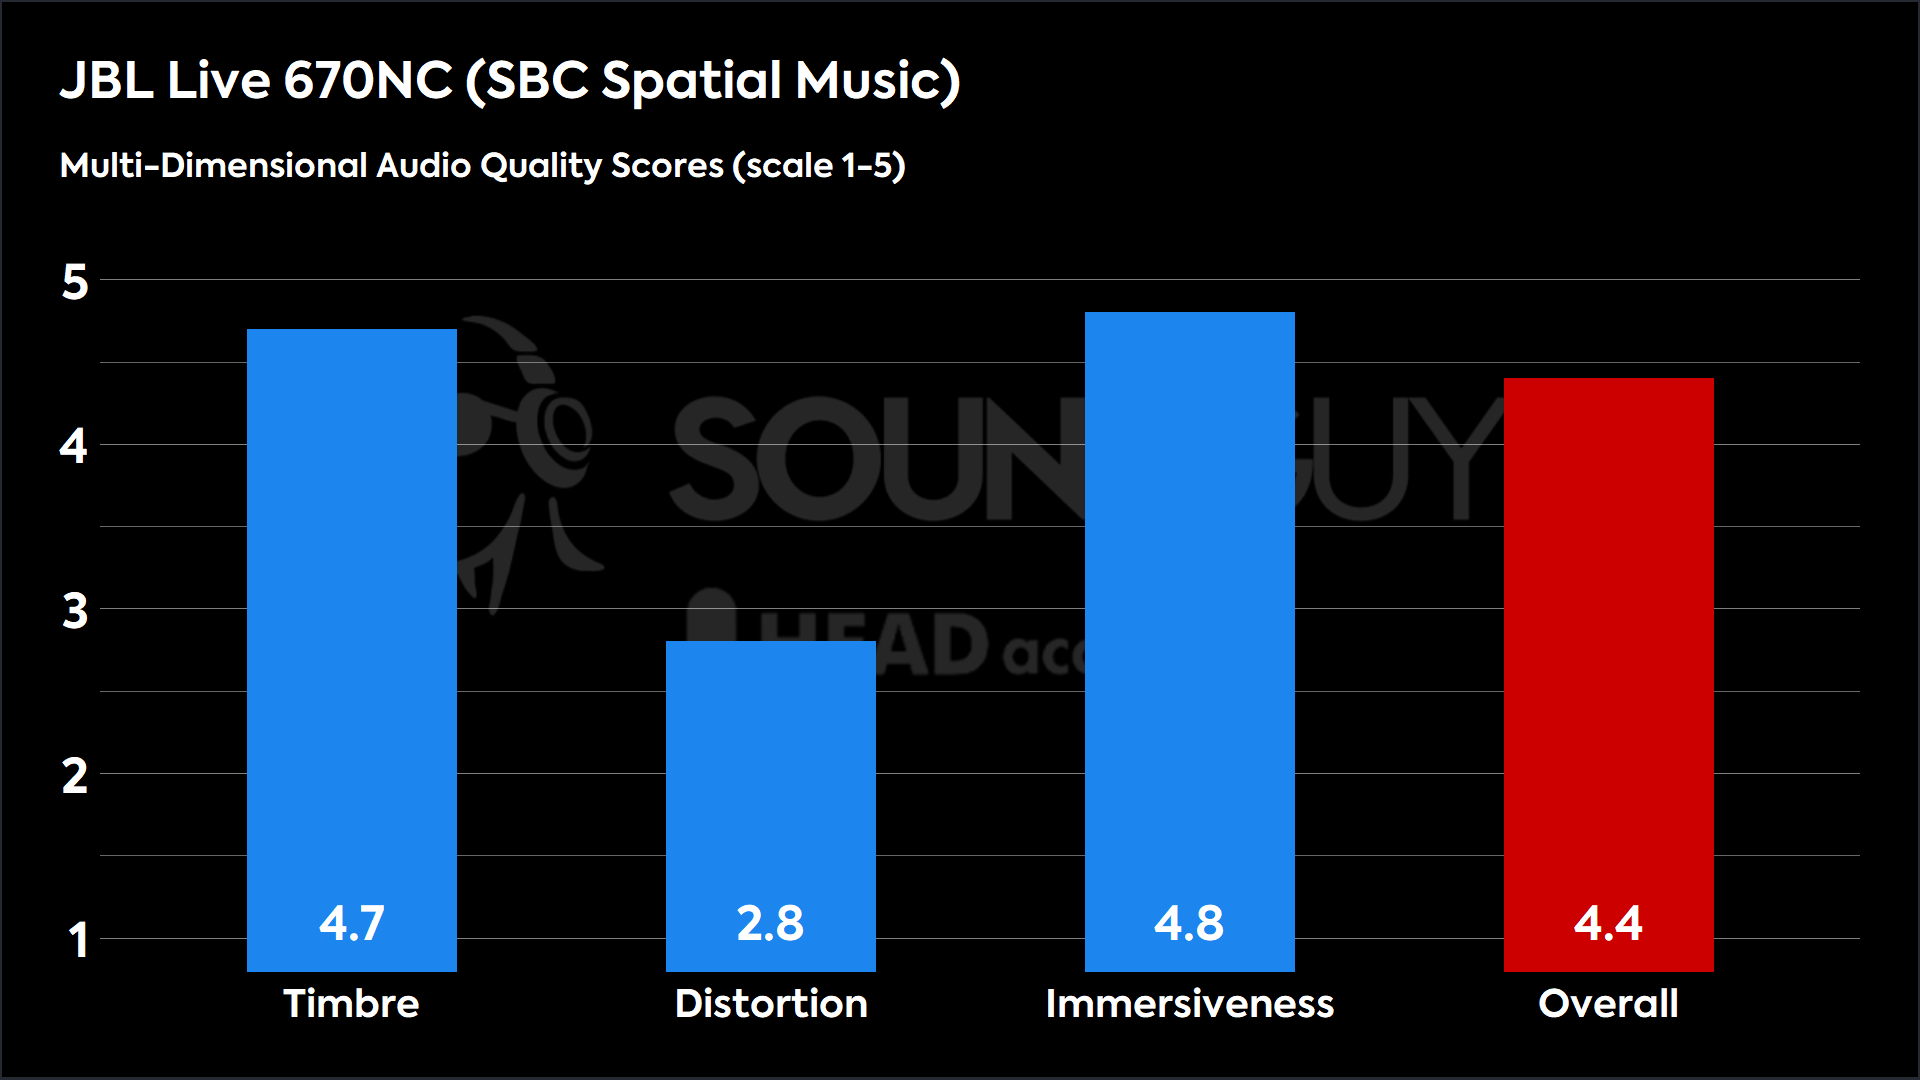 This chart shows the MDAQS results for the JBL Live 670NC in SBC Spatial Music mode. The Timbre score is 4.7, The Distortion score is 2.8, the Immersiveness score is 4.8, and the Overall Score is 4.4).